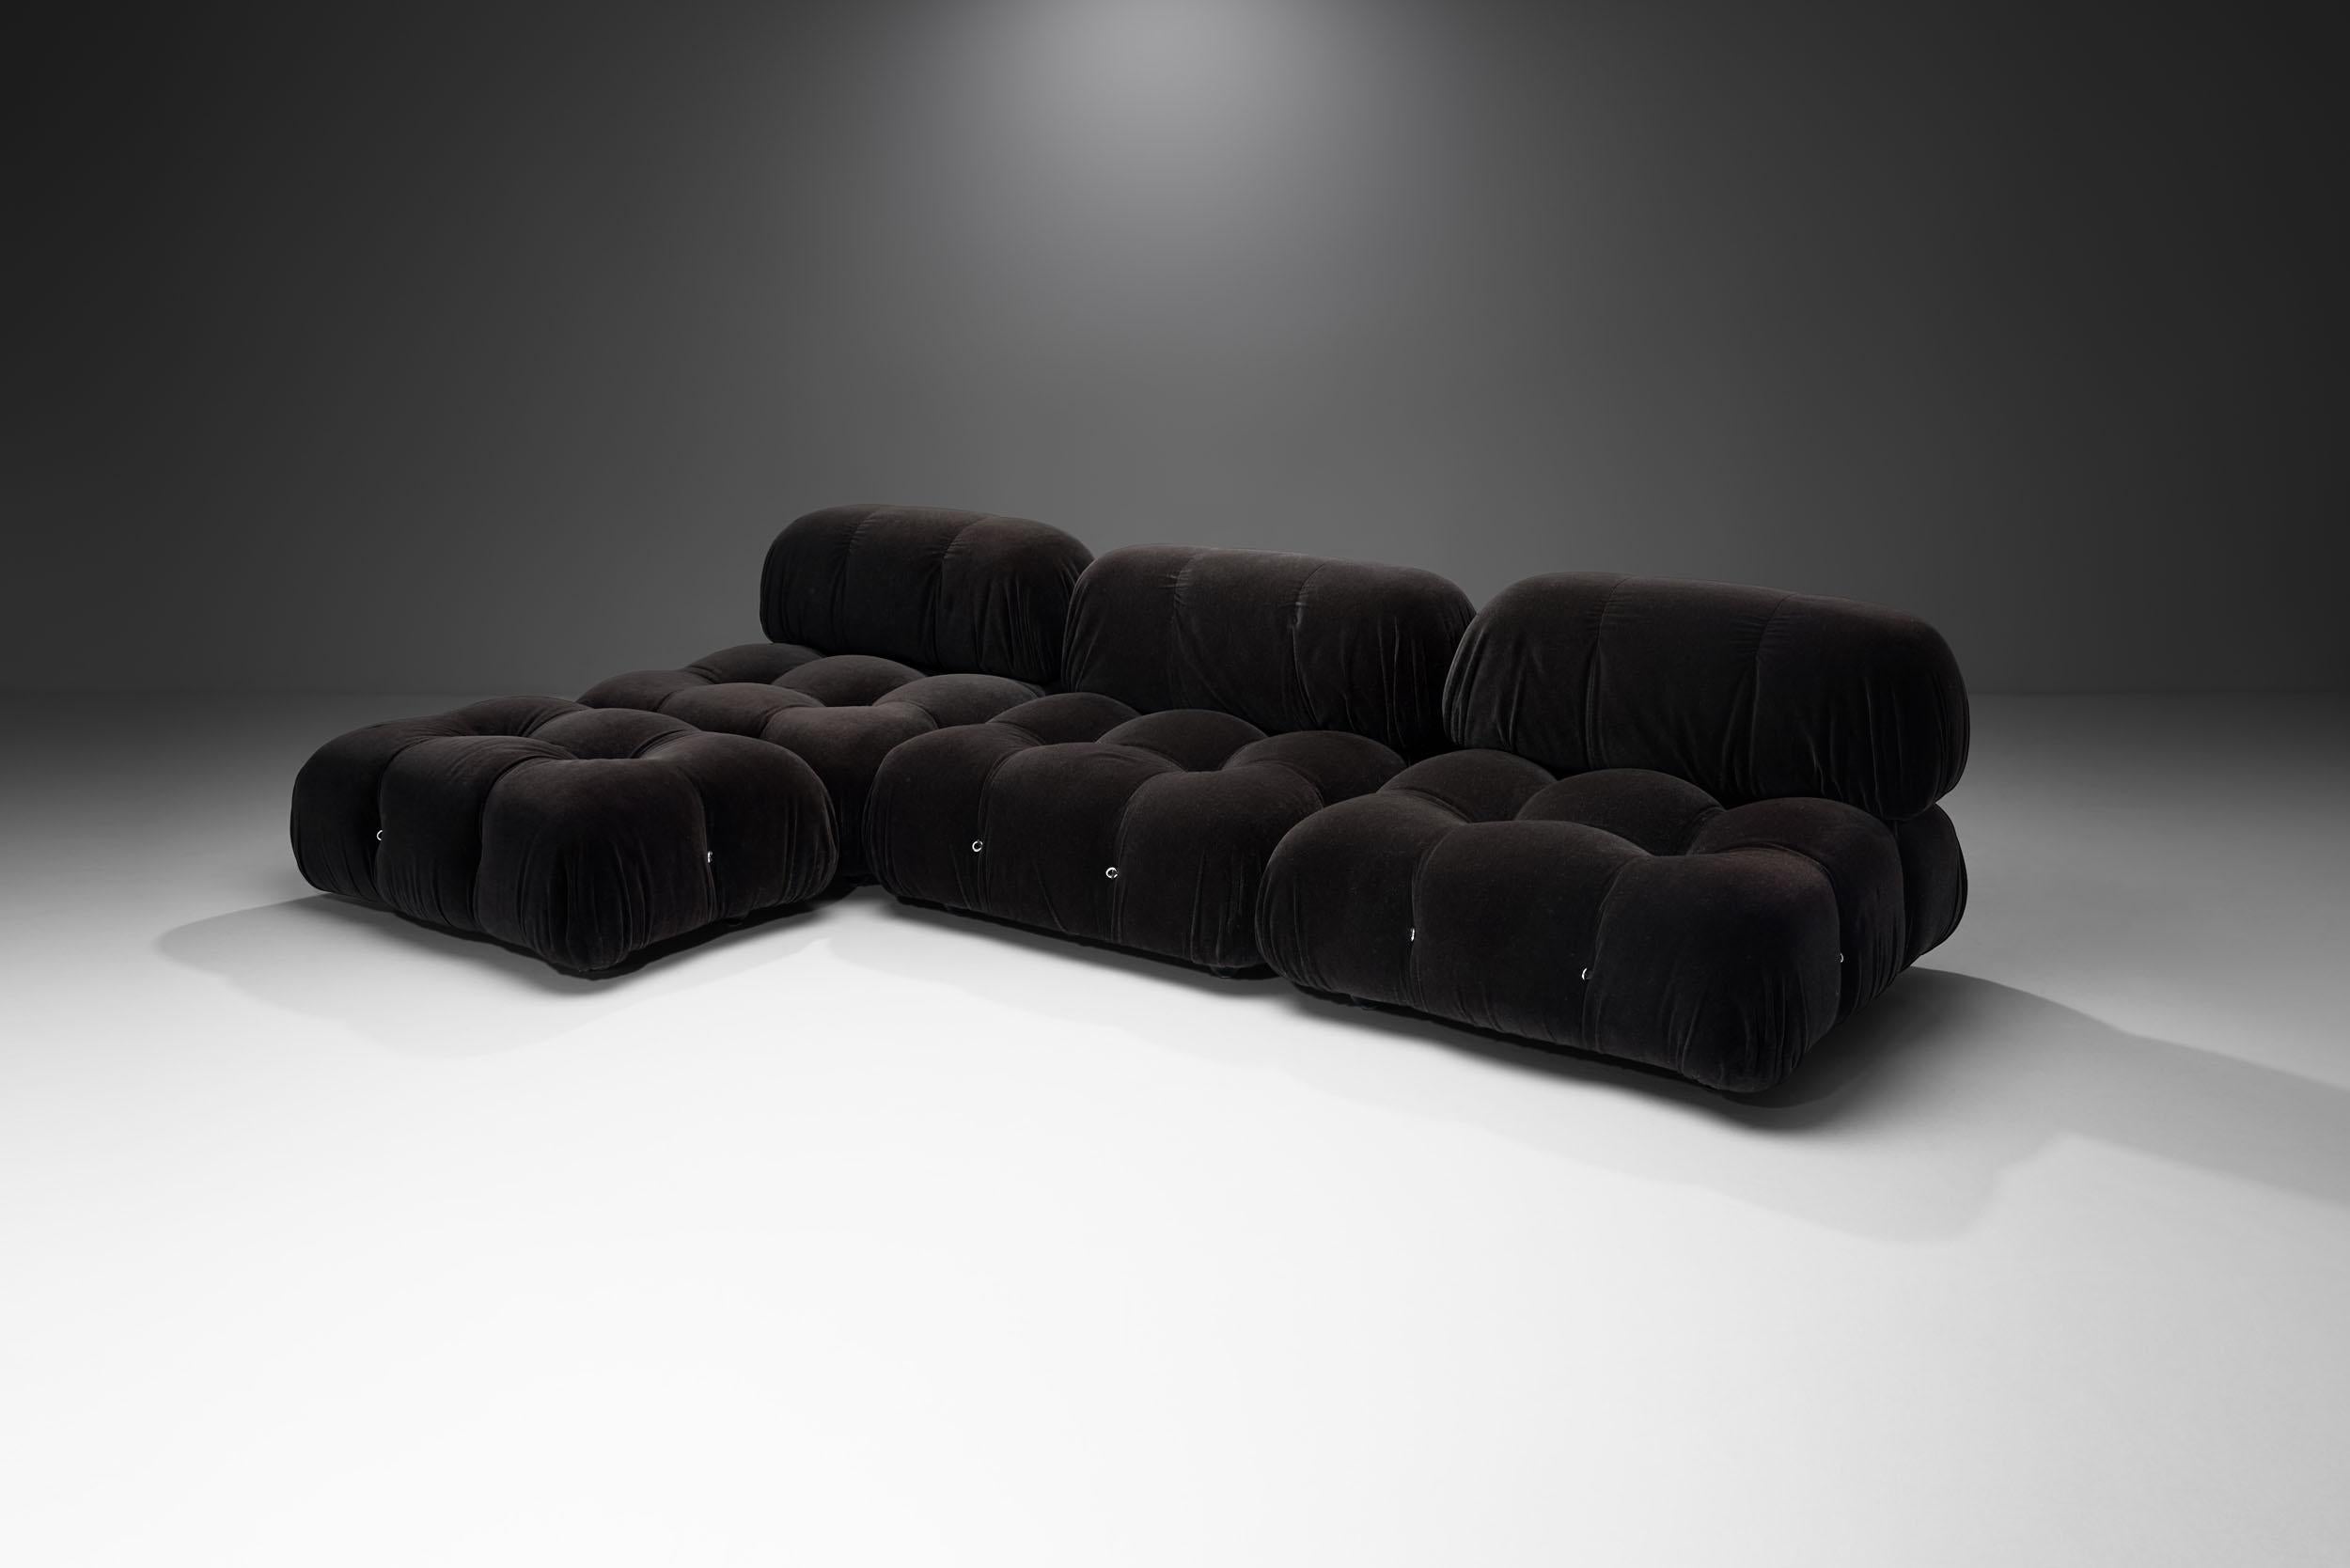 The “Camaleonda” (Italian word play on ‘chameleon’ and ‘wave’) sofa is Mario Bellini’s contemporary classic. The playful, modular design offers endless options for the user, which also inspired the model’s name. Camaleonda has passed through five